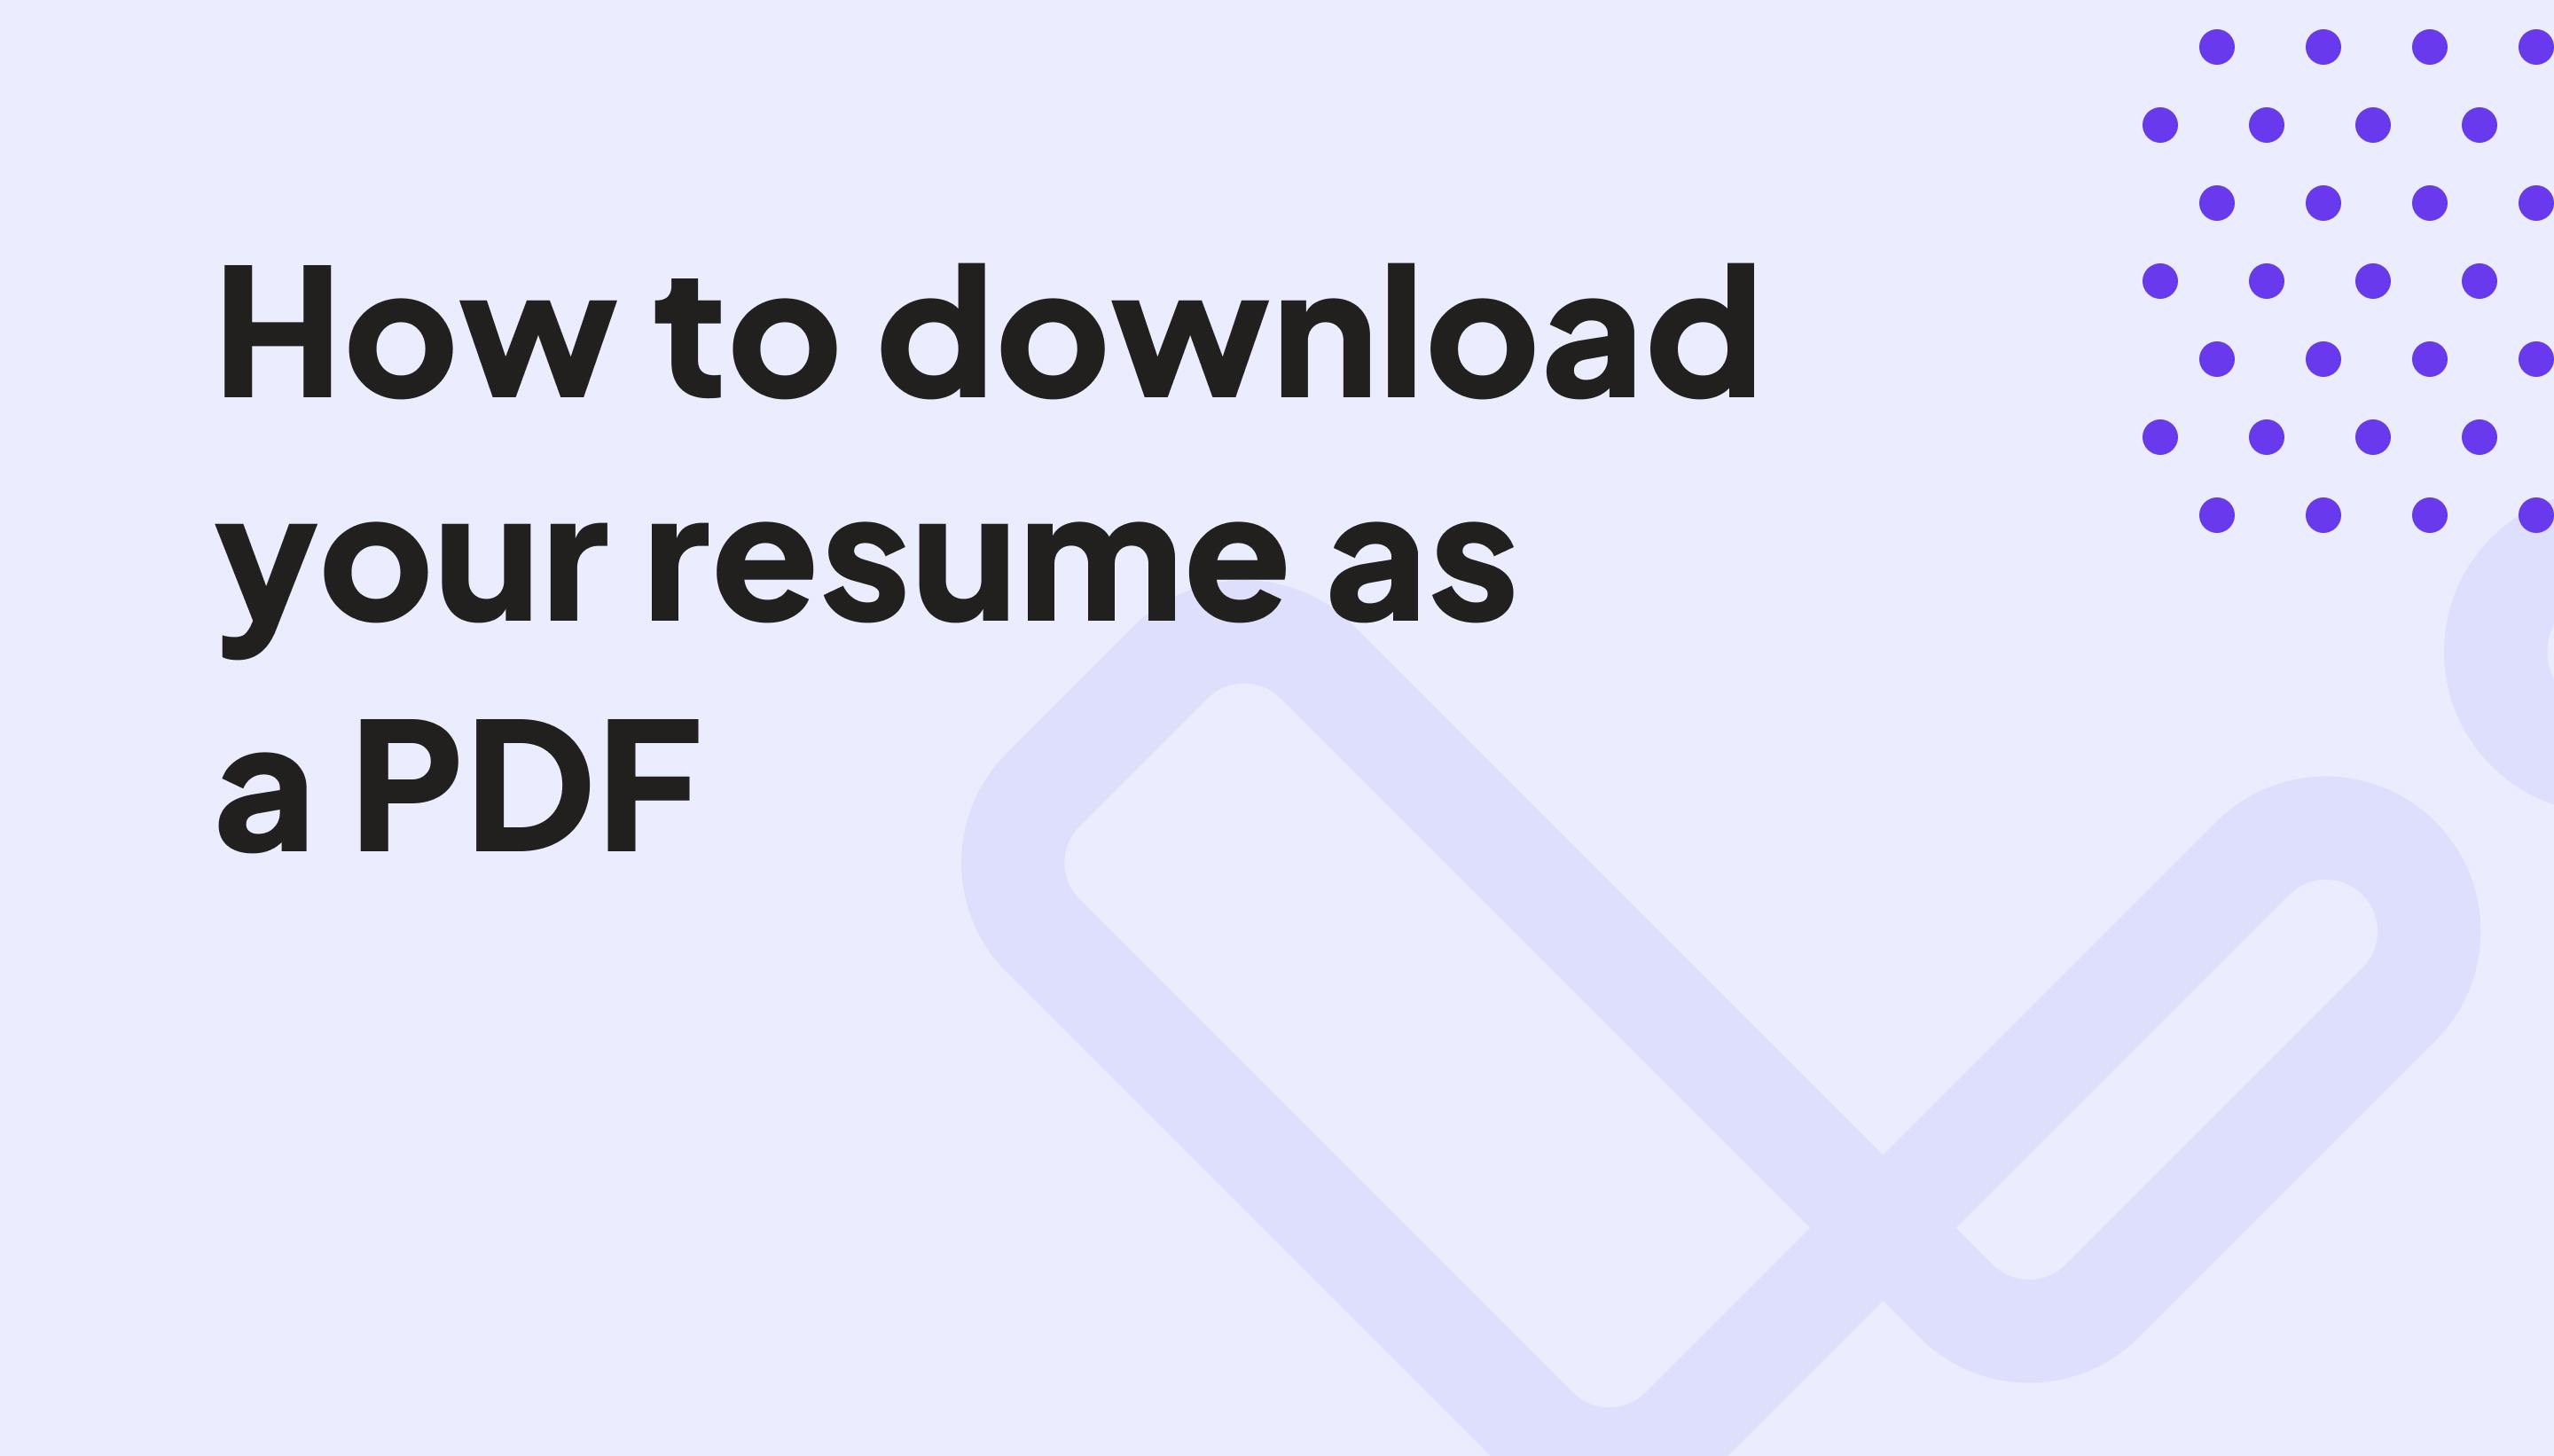 How to download your resume as a PDF